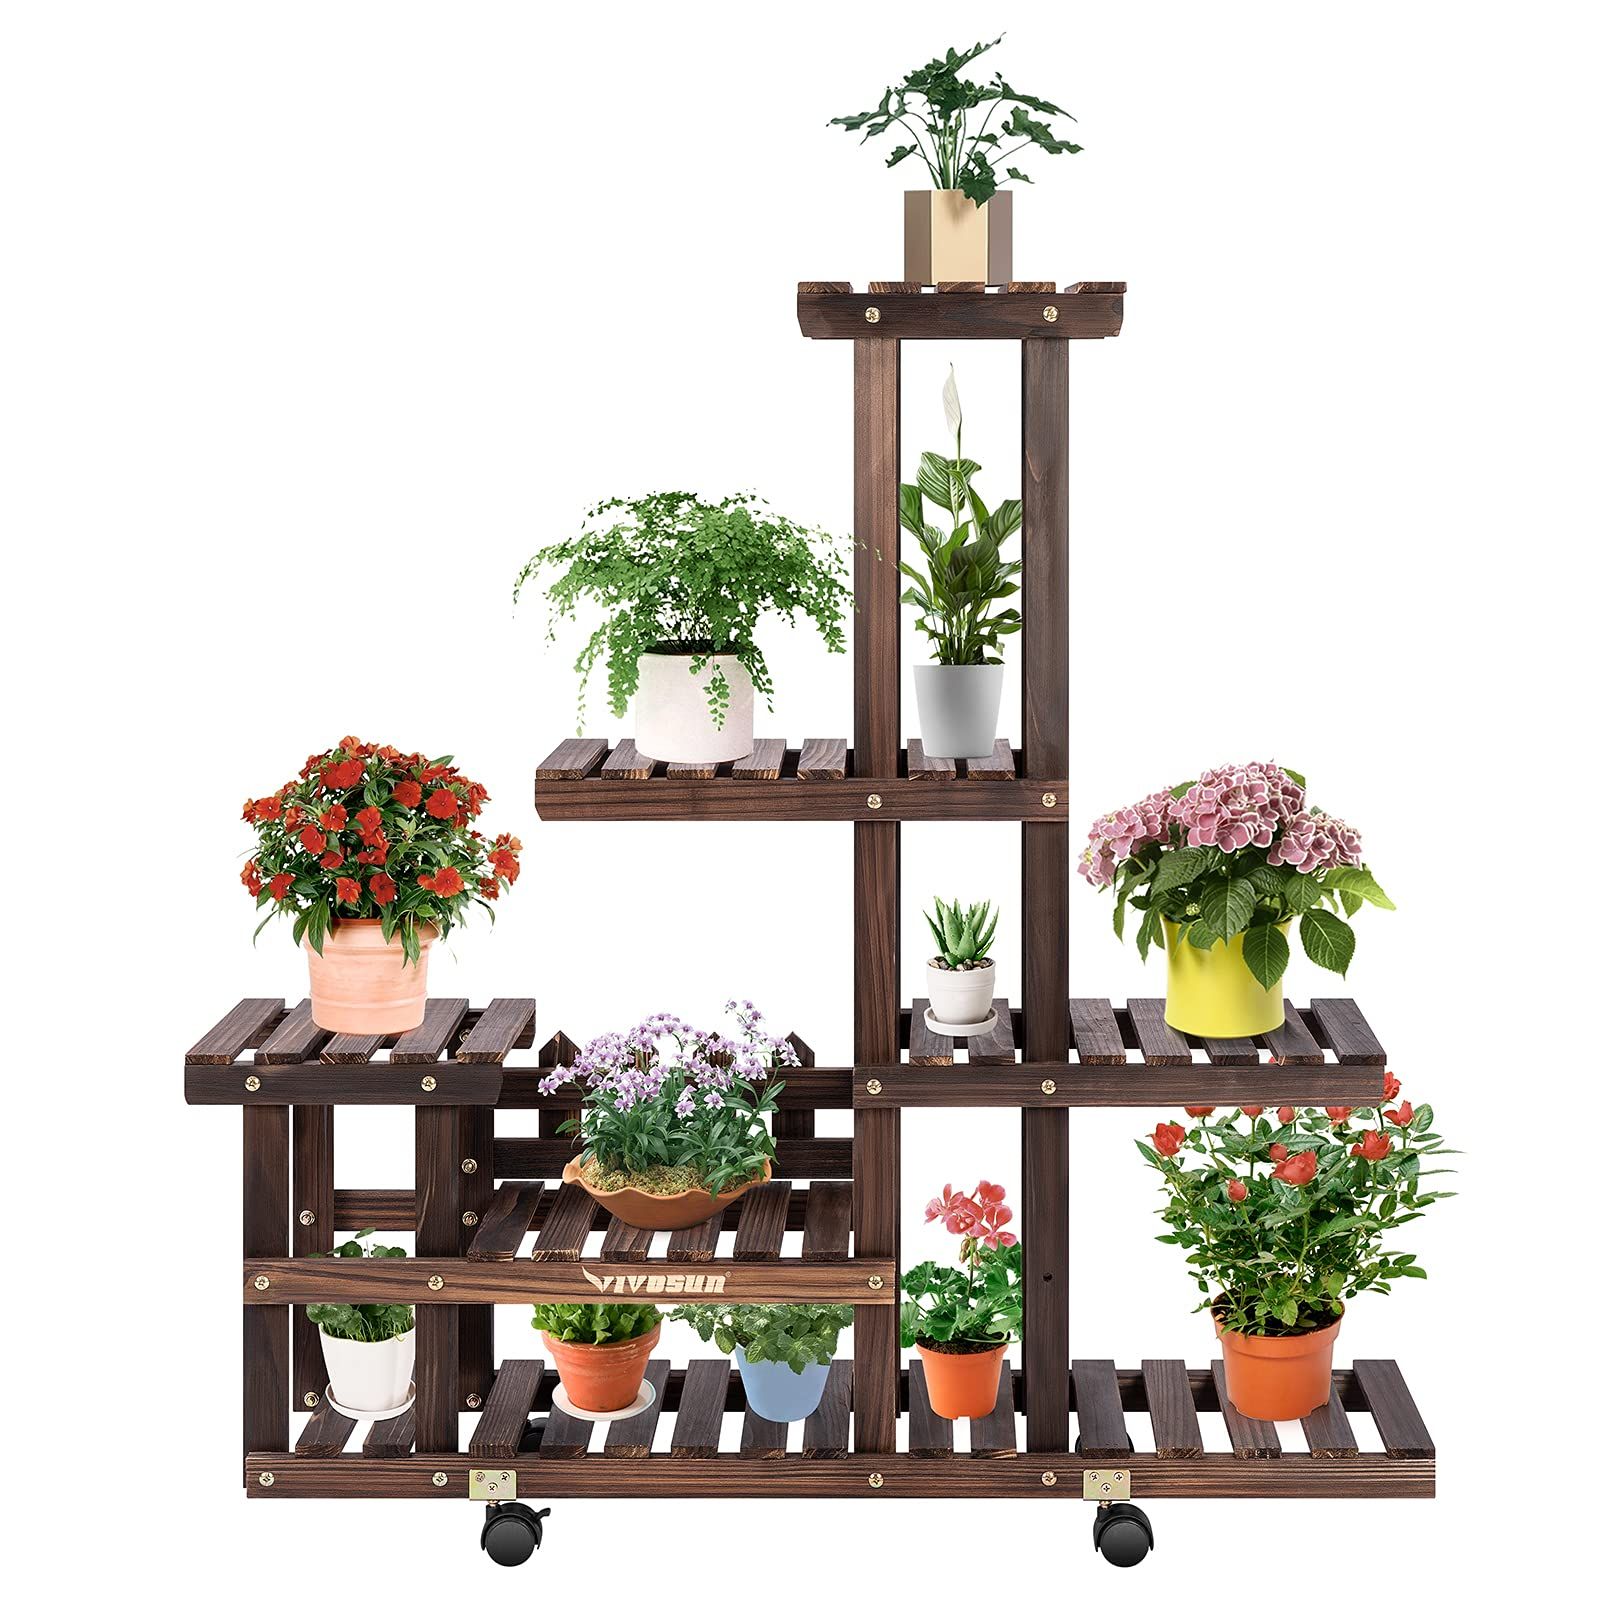 VIVOSUN Plant Stand 6 Tiers 11 Potted Indoor Plant Shelf, Tiered Wooden Flower Holder Plant Rack wit | Amazon (US)